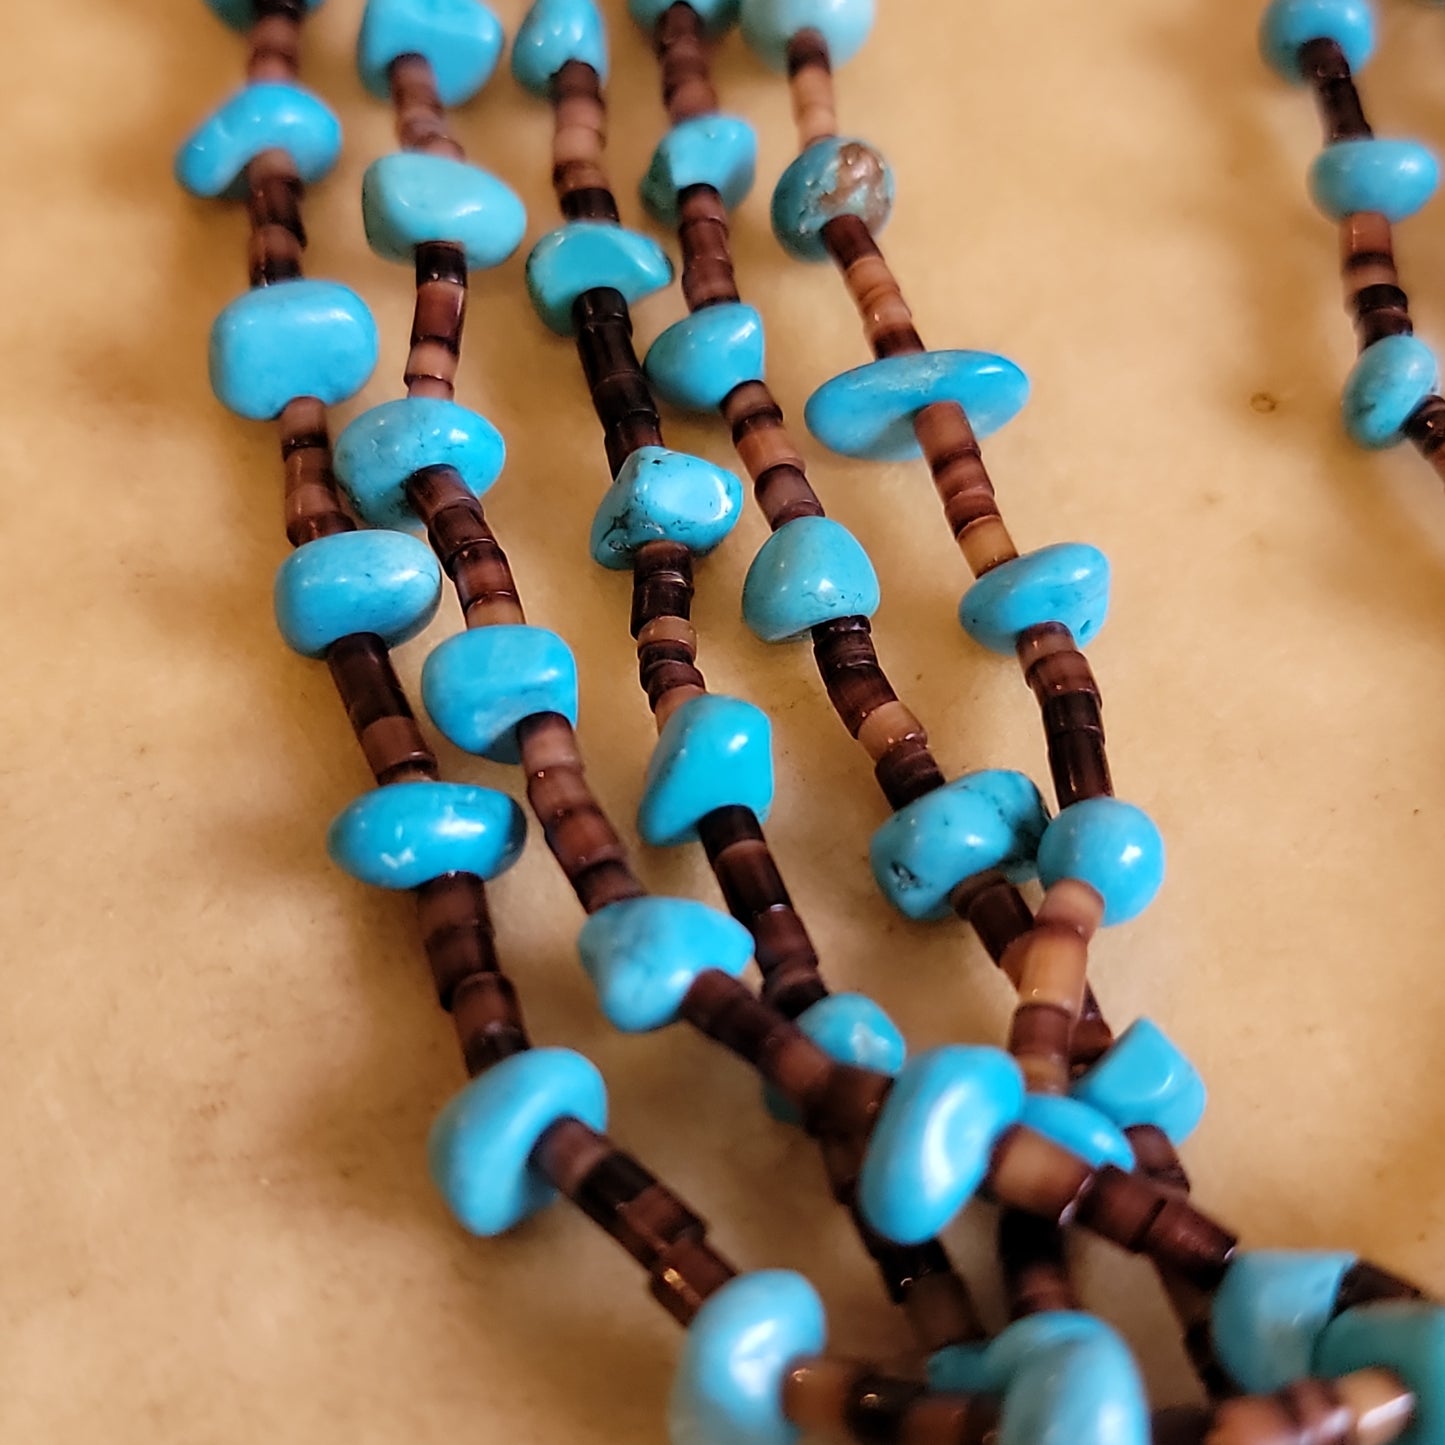 "Old Pawn" Navajo Five Strand Pinshell Heishe and Turquoise Nuggets Necklace